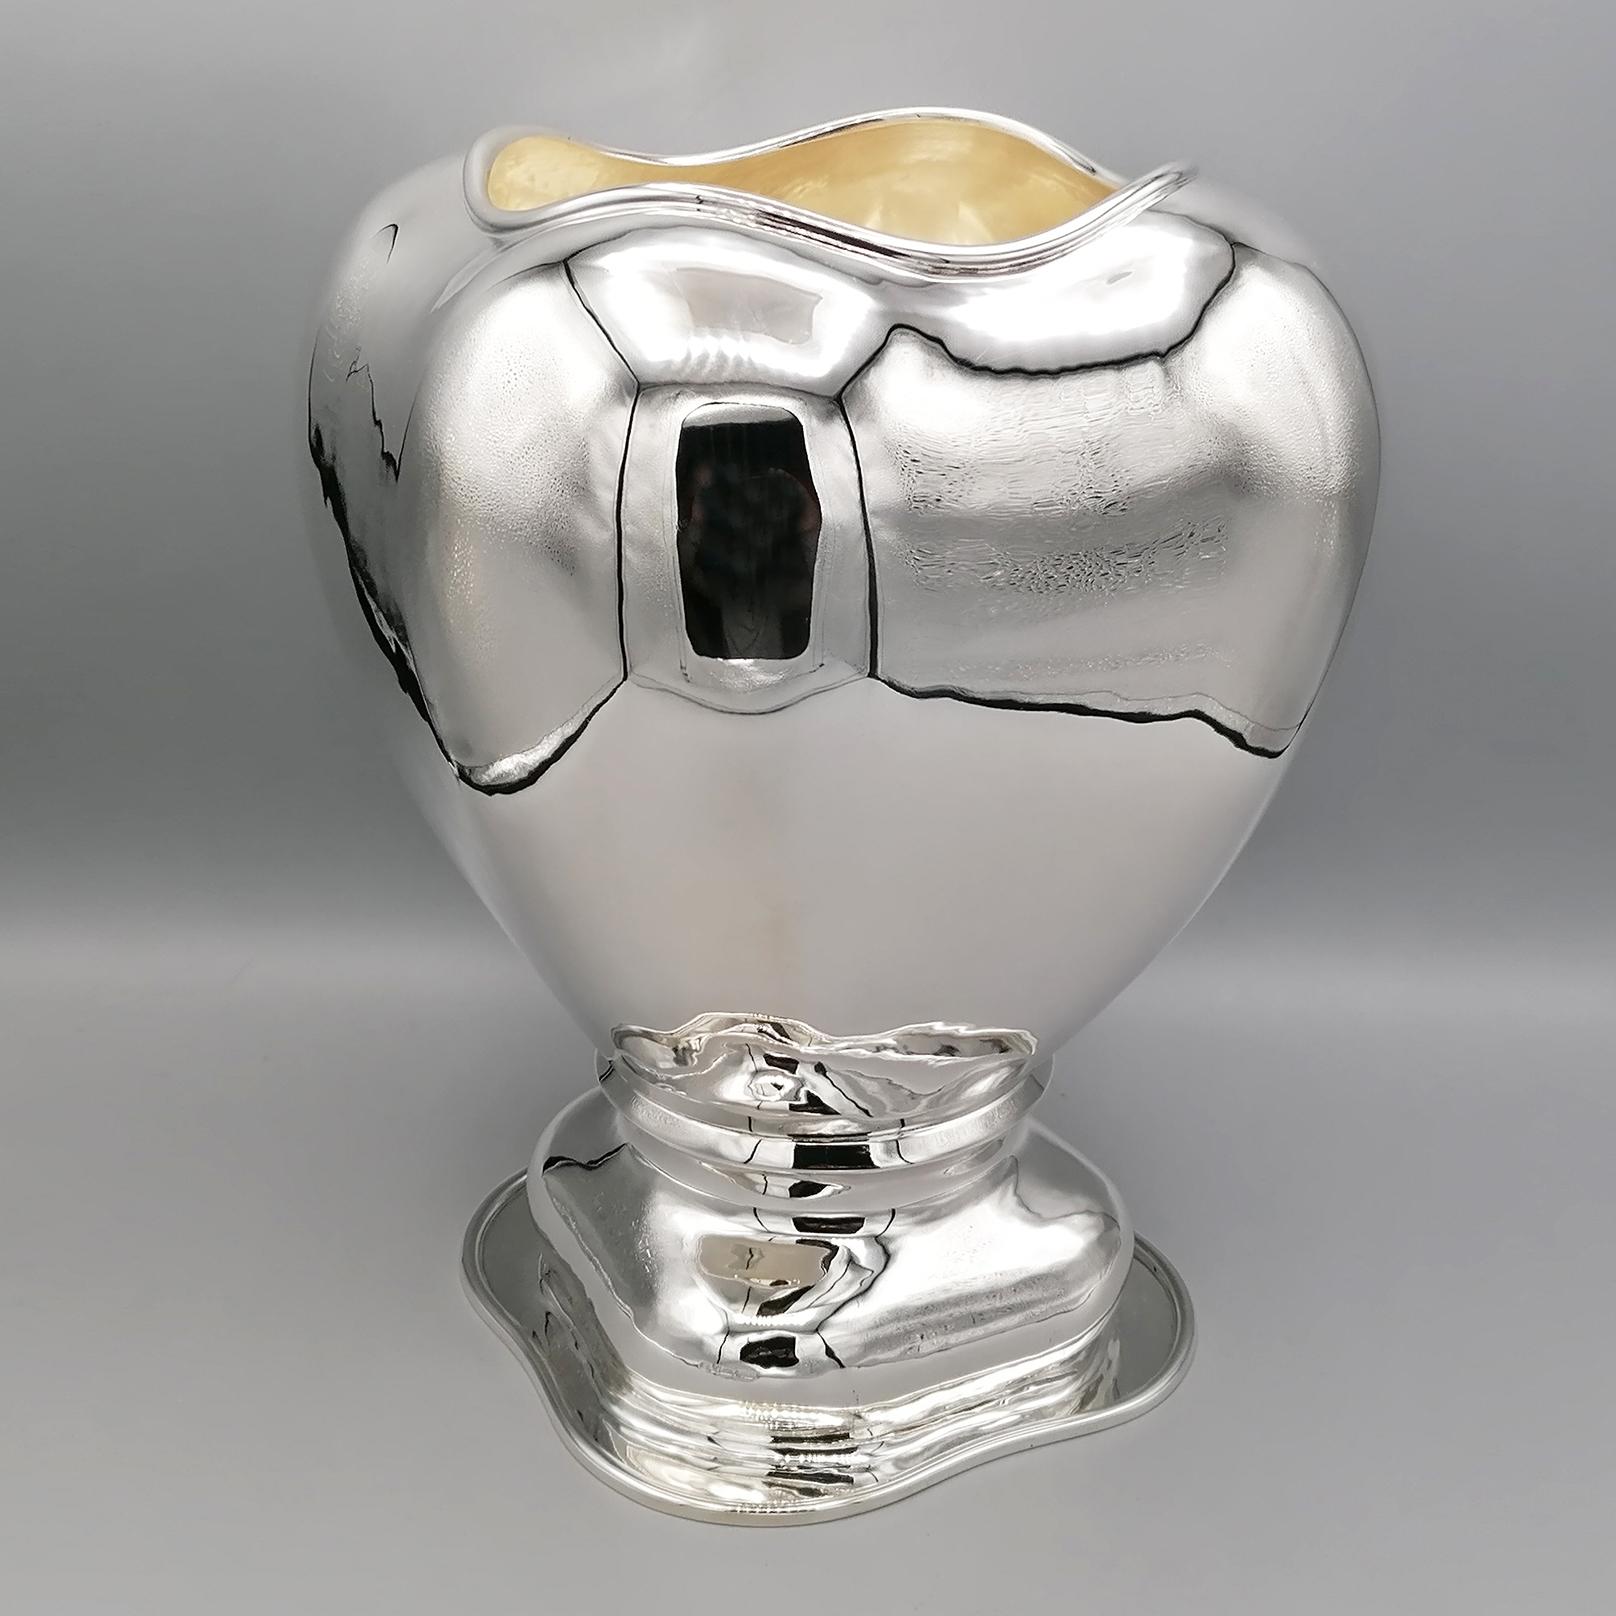 Sterlin Silver vase. 
The smooth body is shaped and slightly hammered
The foot follows the shape of the body harmoniously
Completely hand made

This vase has been studied to have a balance between the classicism of the object and the modernity of